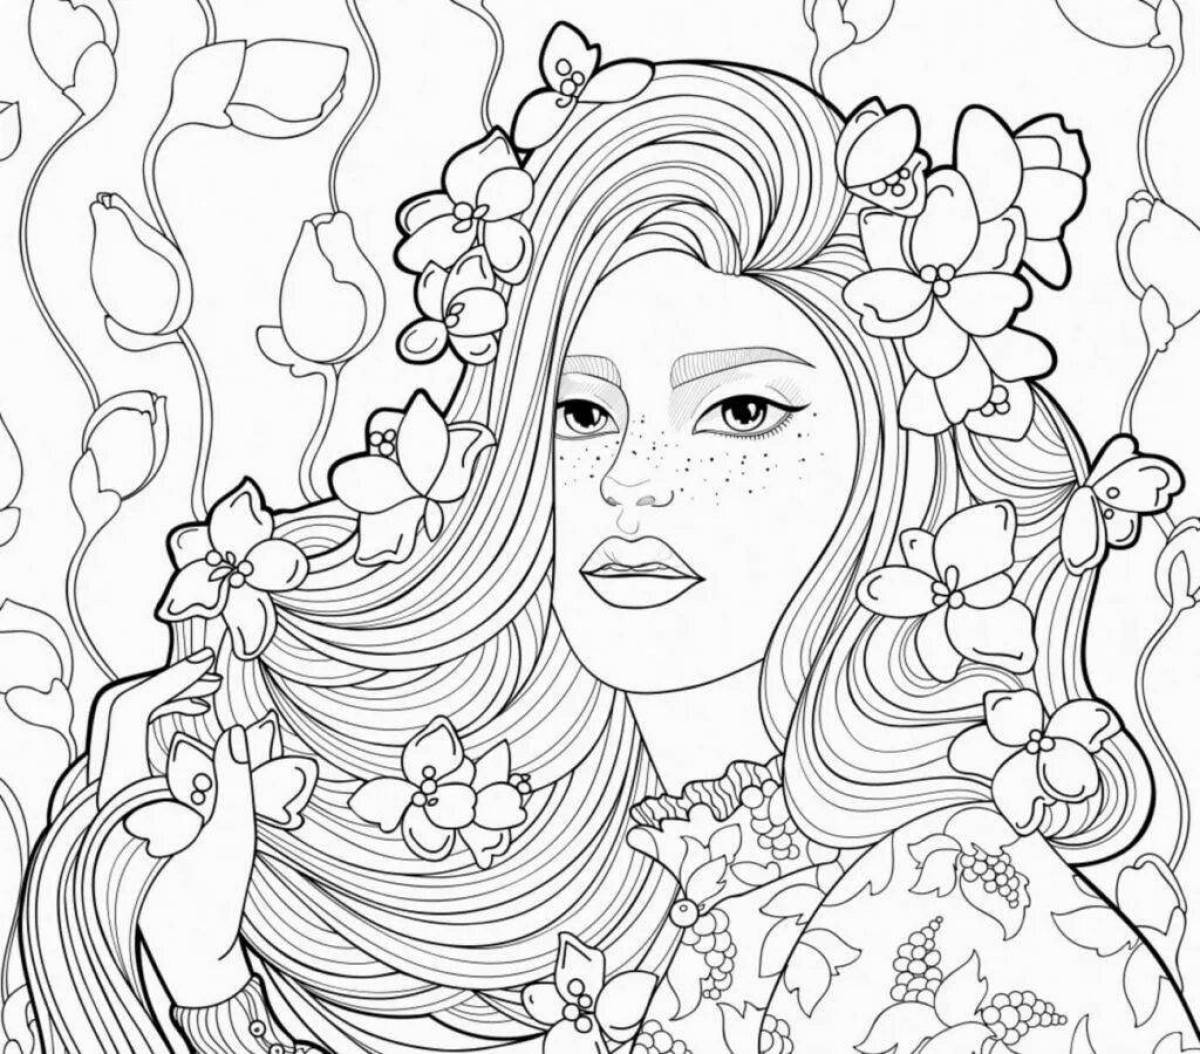 Exquisite coloring book for 18 year old girls